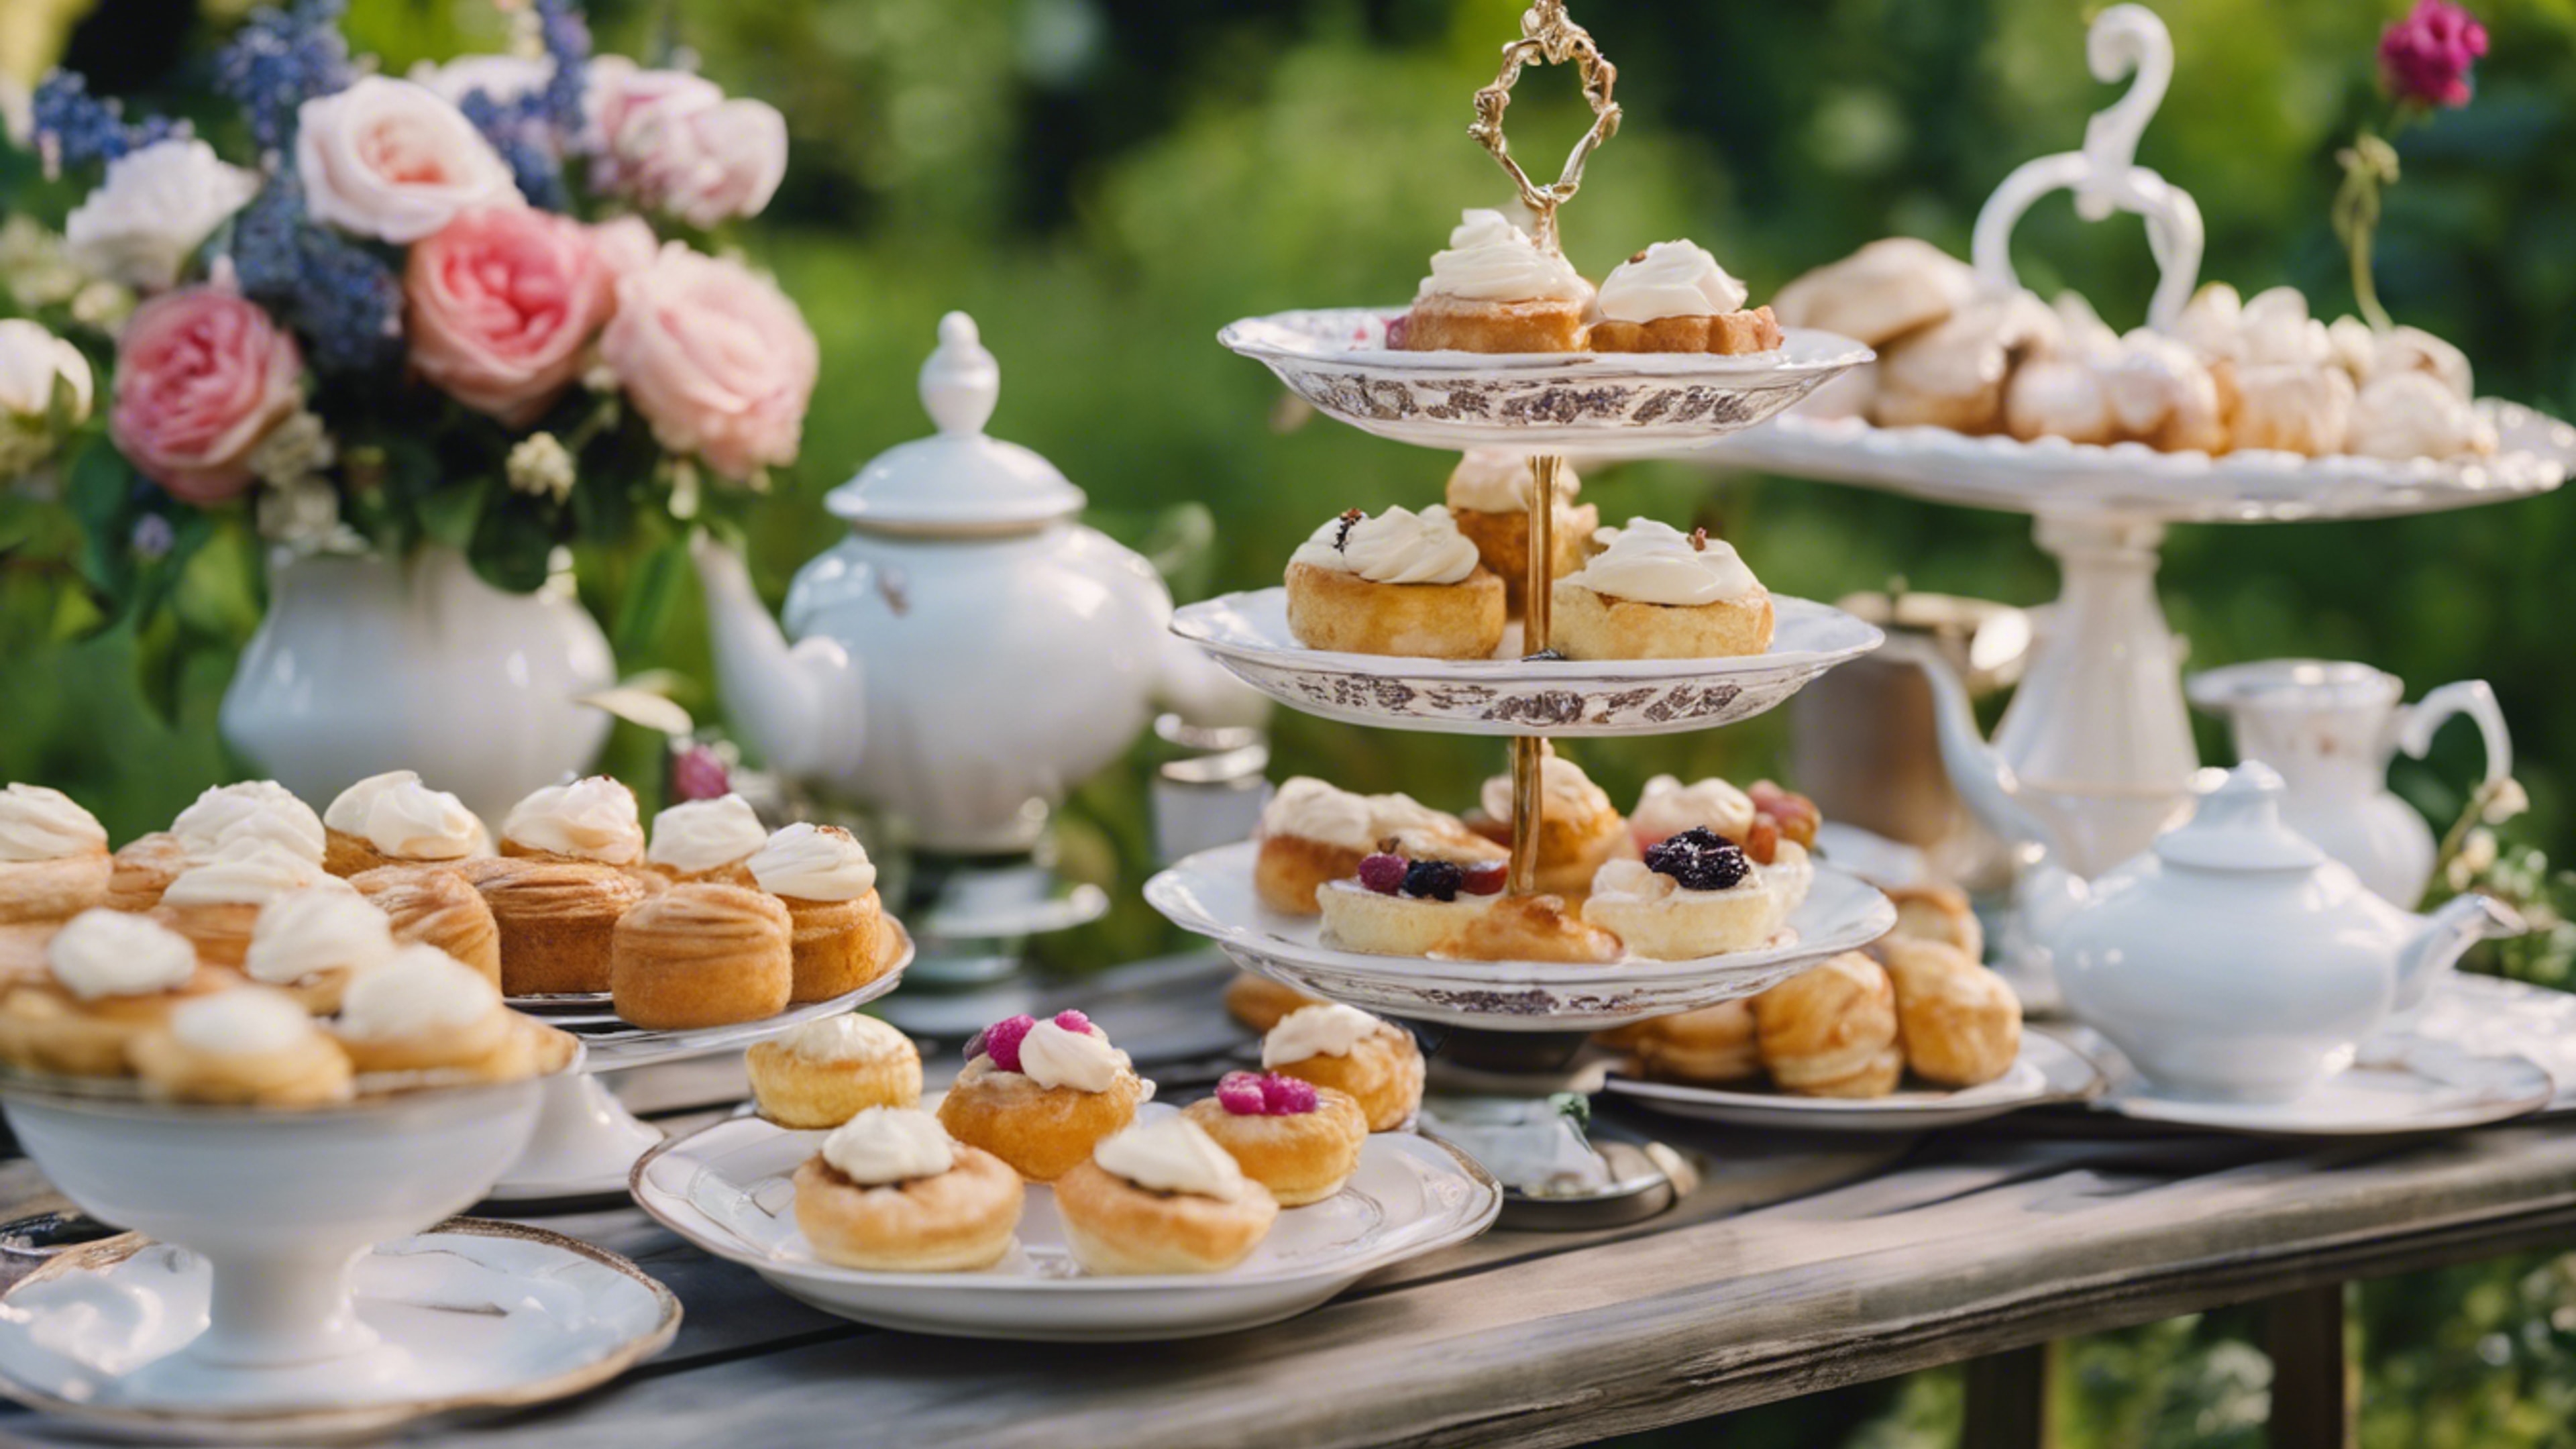 A delicious preppy summer tea party in the garden, with scones, cakes, and pastries displayed on tiered stands, and a pot of brewed tea. Wallpaper[d93ead9709664ab6b678]